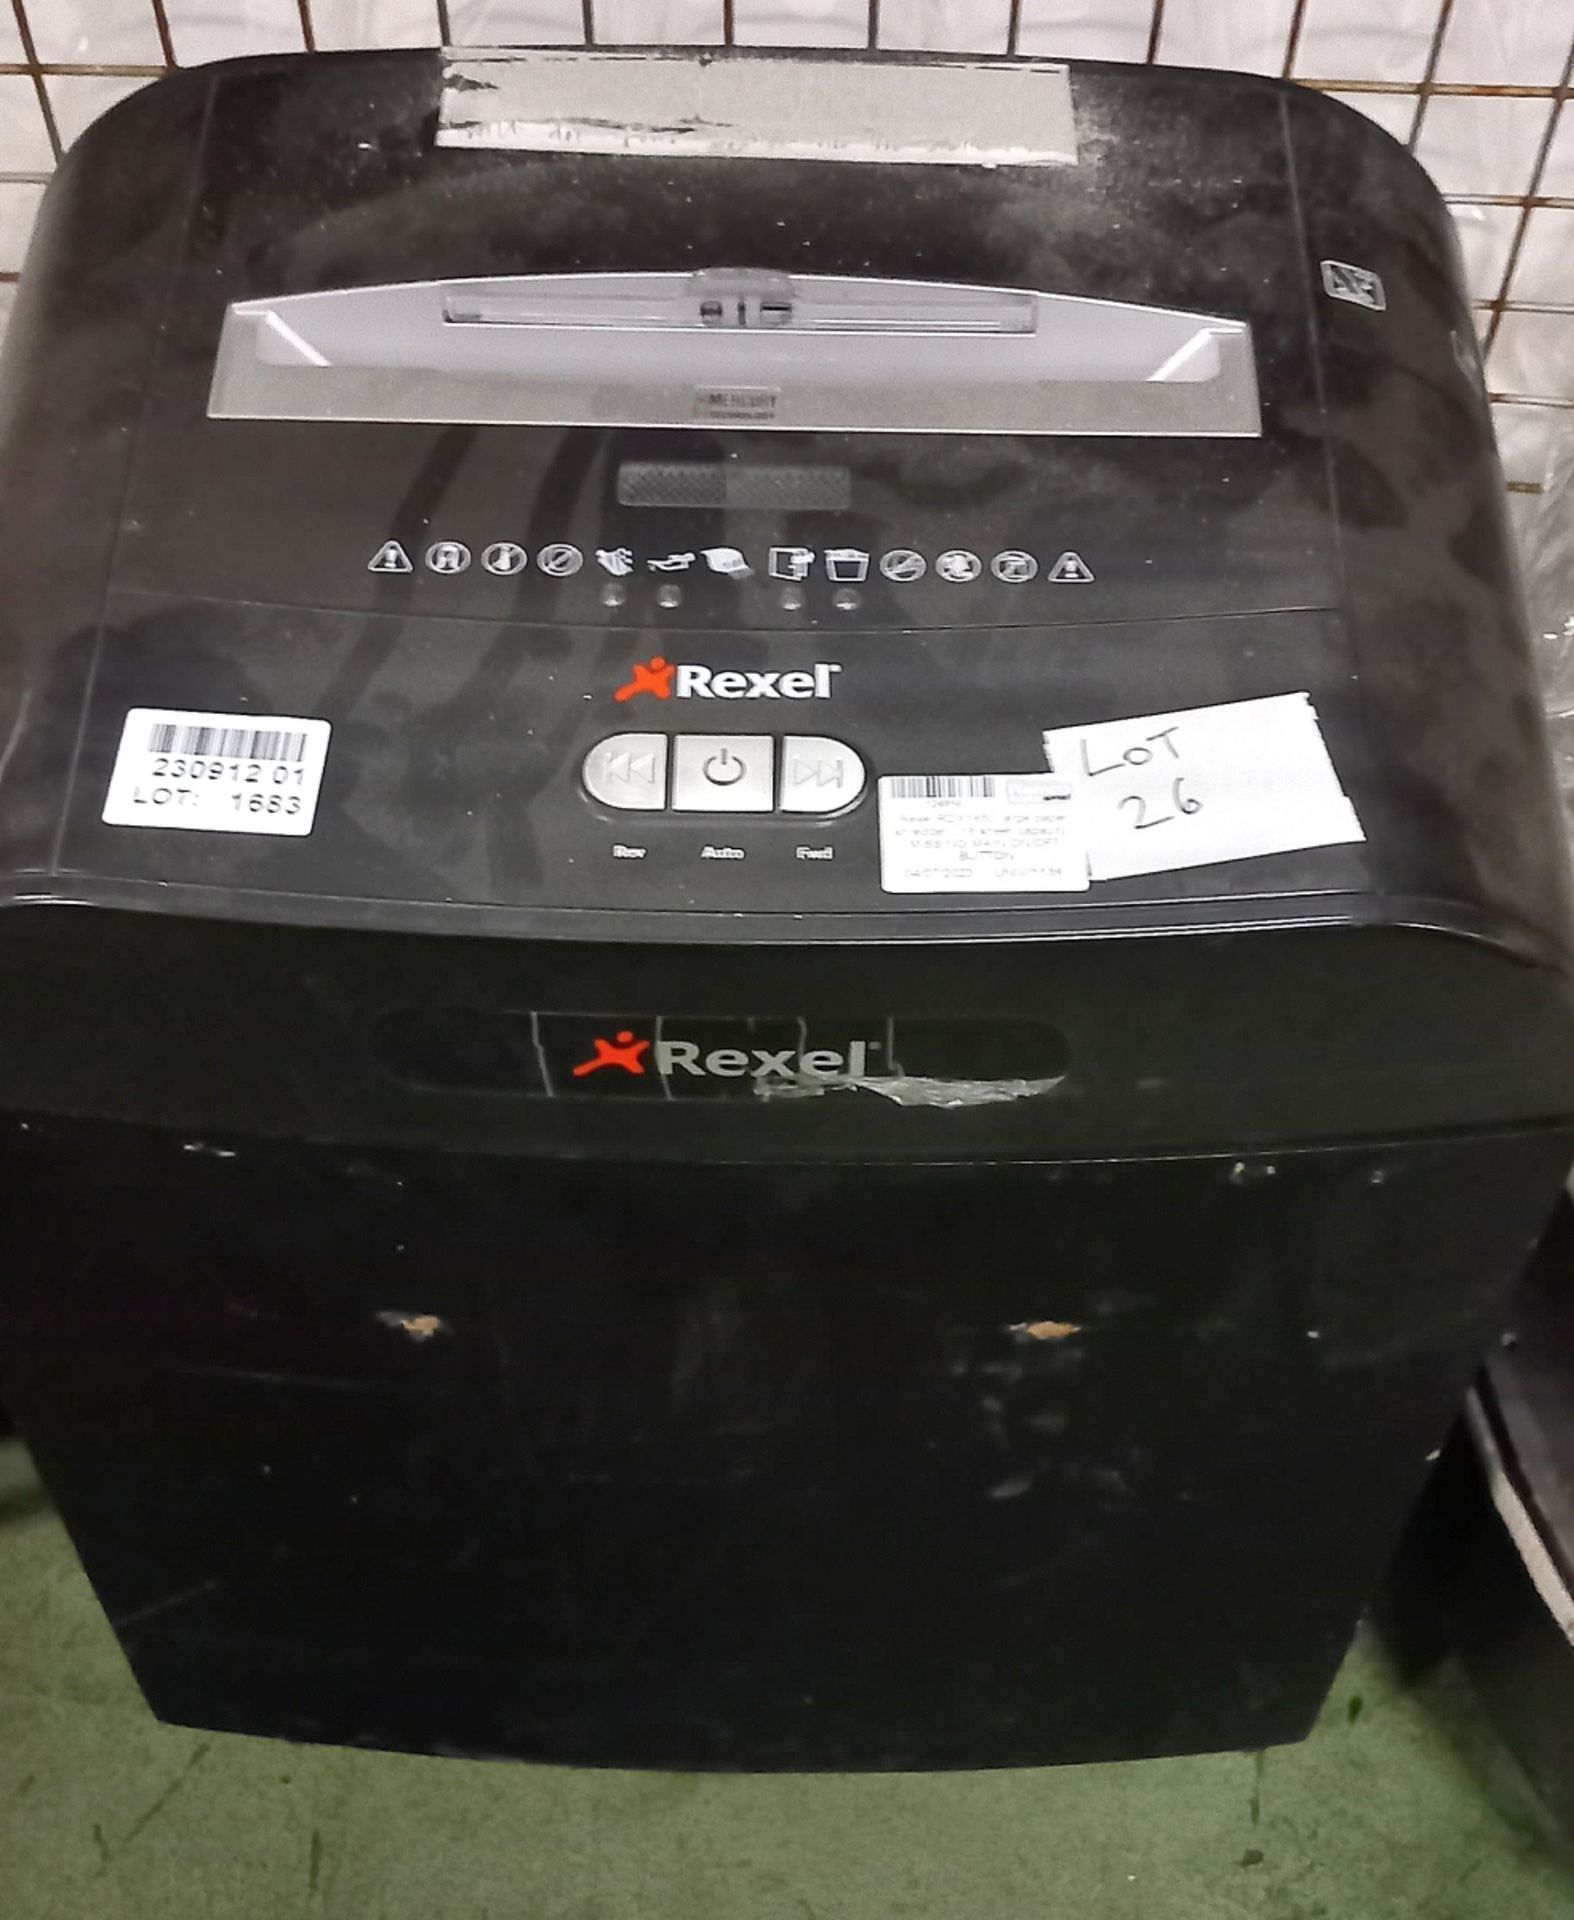 Rexel RDX1850 large paper shredder - 18 sheet capacity - MISSING MAIN ON/OFF BUTTON